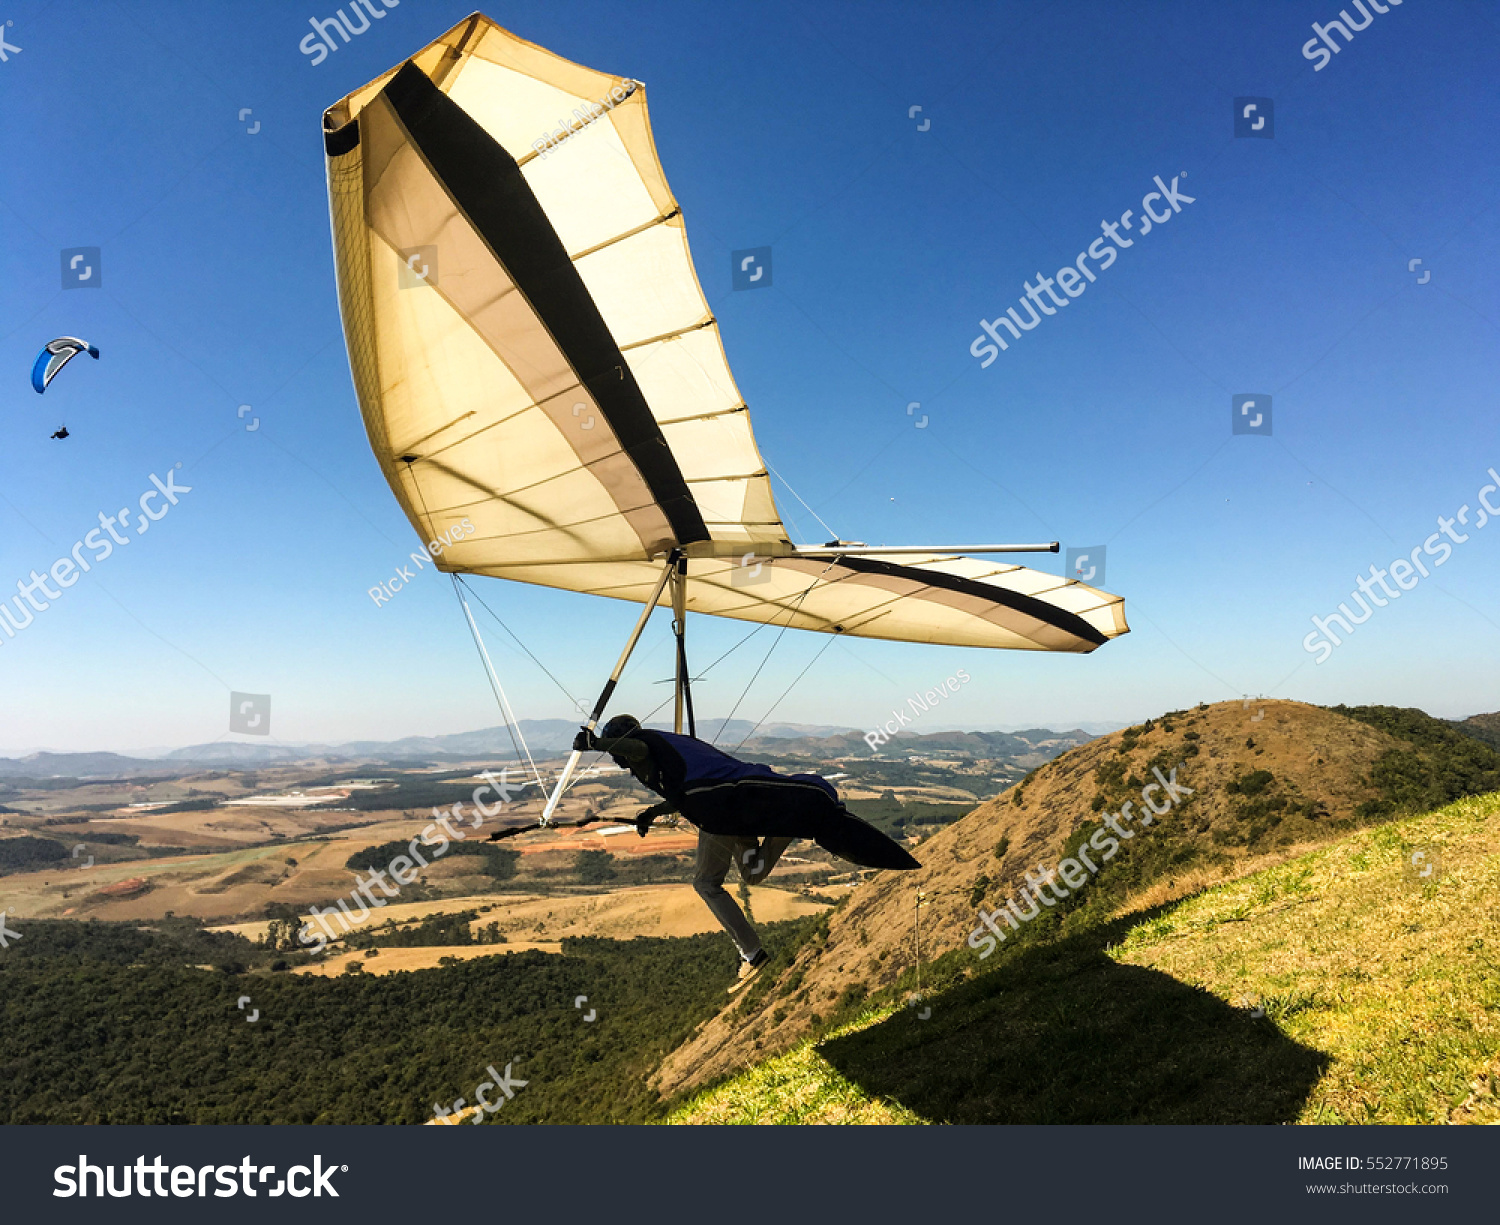 hang gliding launching at beautiful sunny day. Adventure concept #552771895